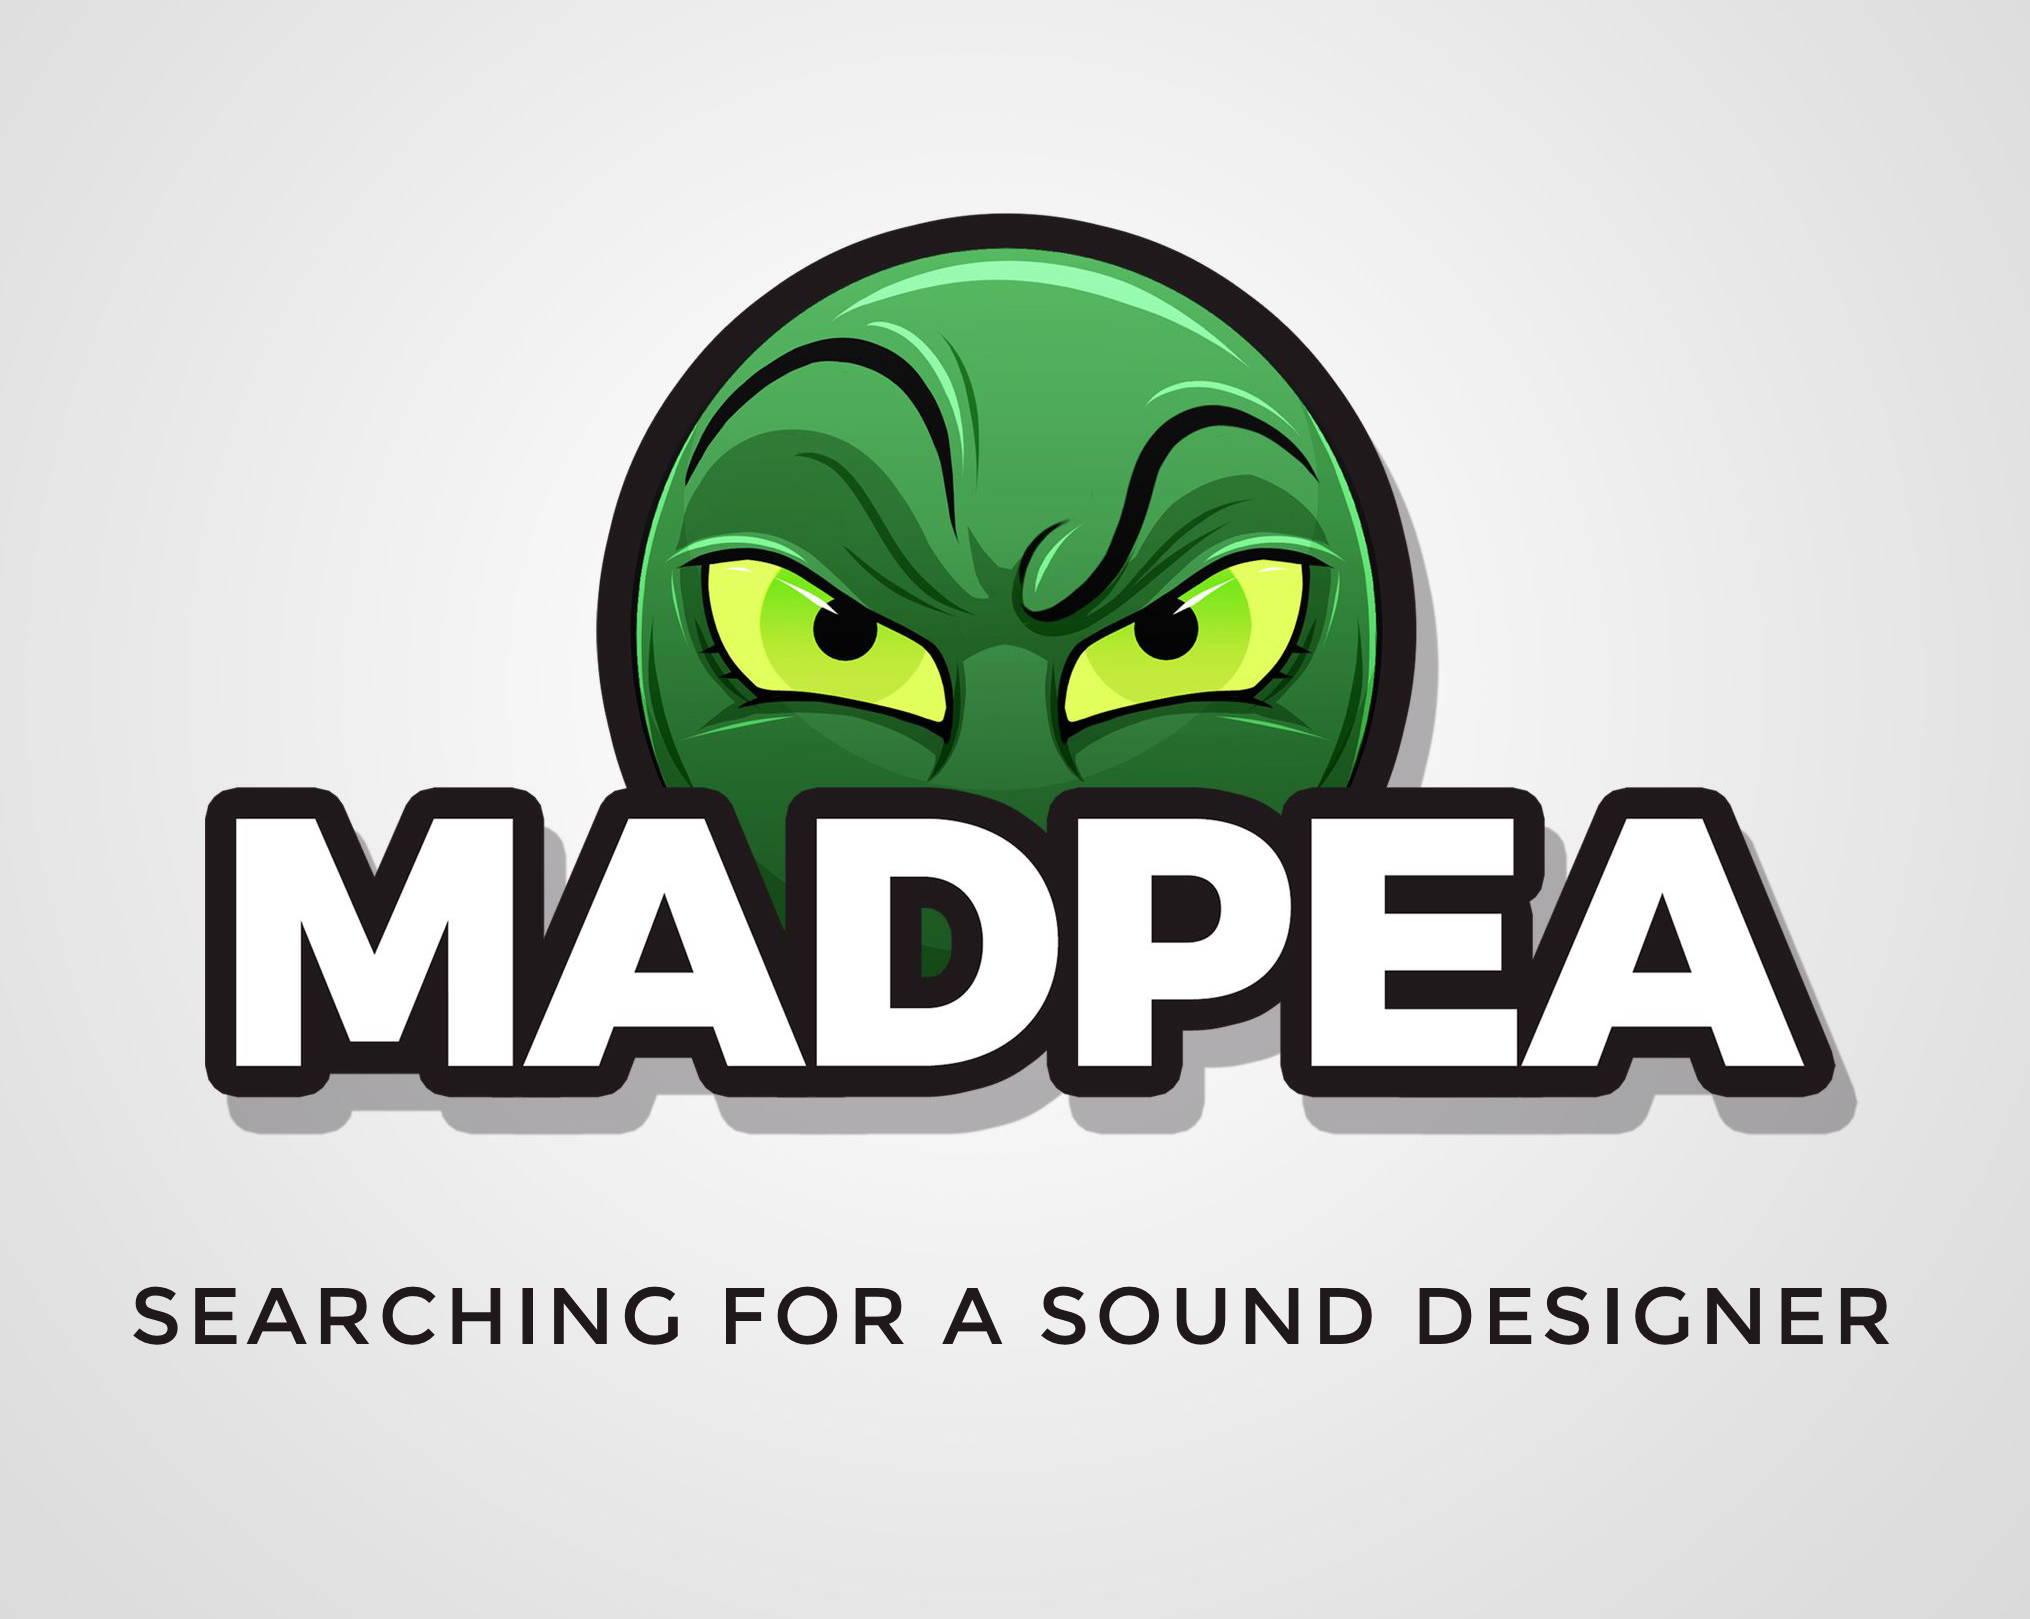 MadPea – Searching For A Sound Designer